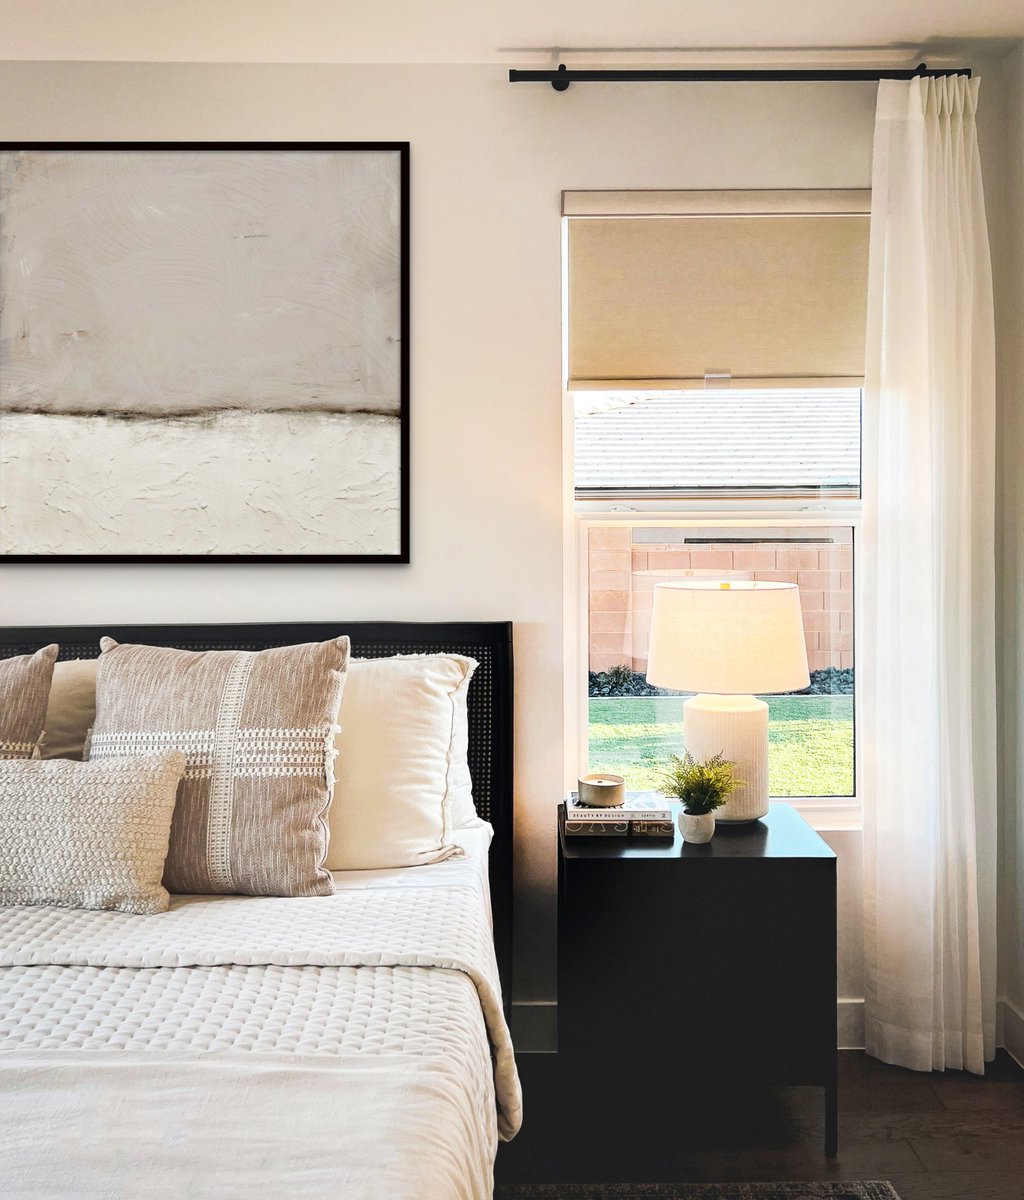 The perfect frame can help elevate your wall art & complete your room, so we’re happy to celebrate National Custom Framing Day 🖼! #neutraldecor #bedroomdesign #framedart #wallart #abstractart #artdecor #artpublishers #artconsultant #walldecor #decortrends #warmneutrals #cozyhome